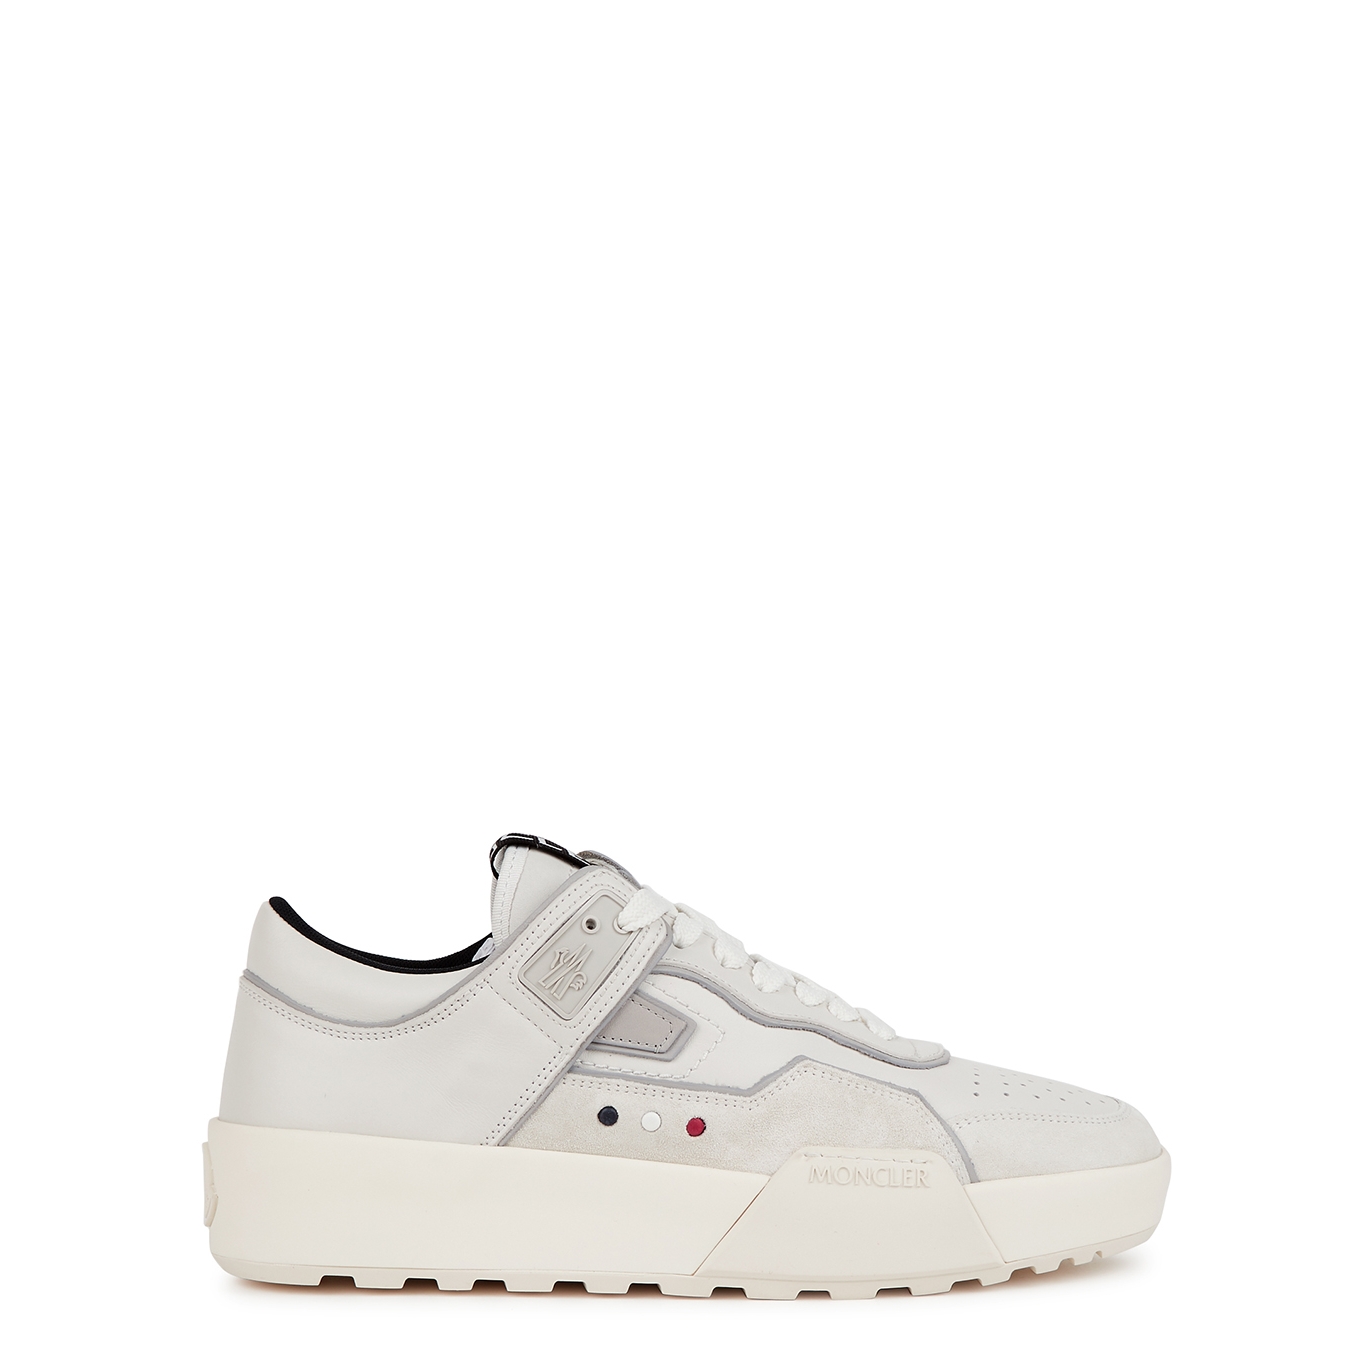 Moncler Promyx White Leather Sneakers - 11